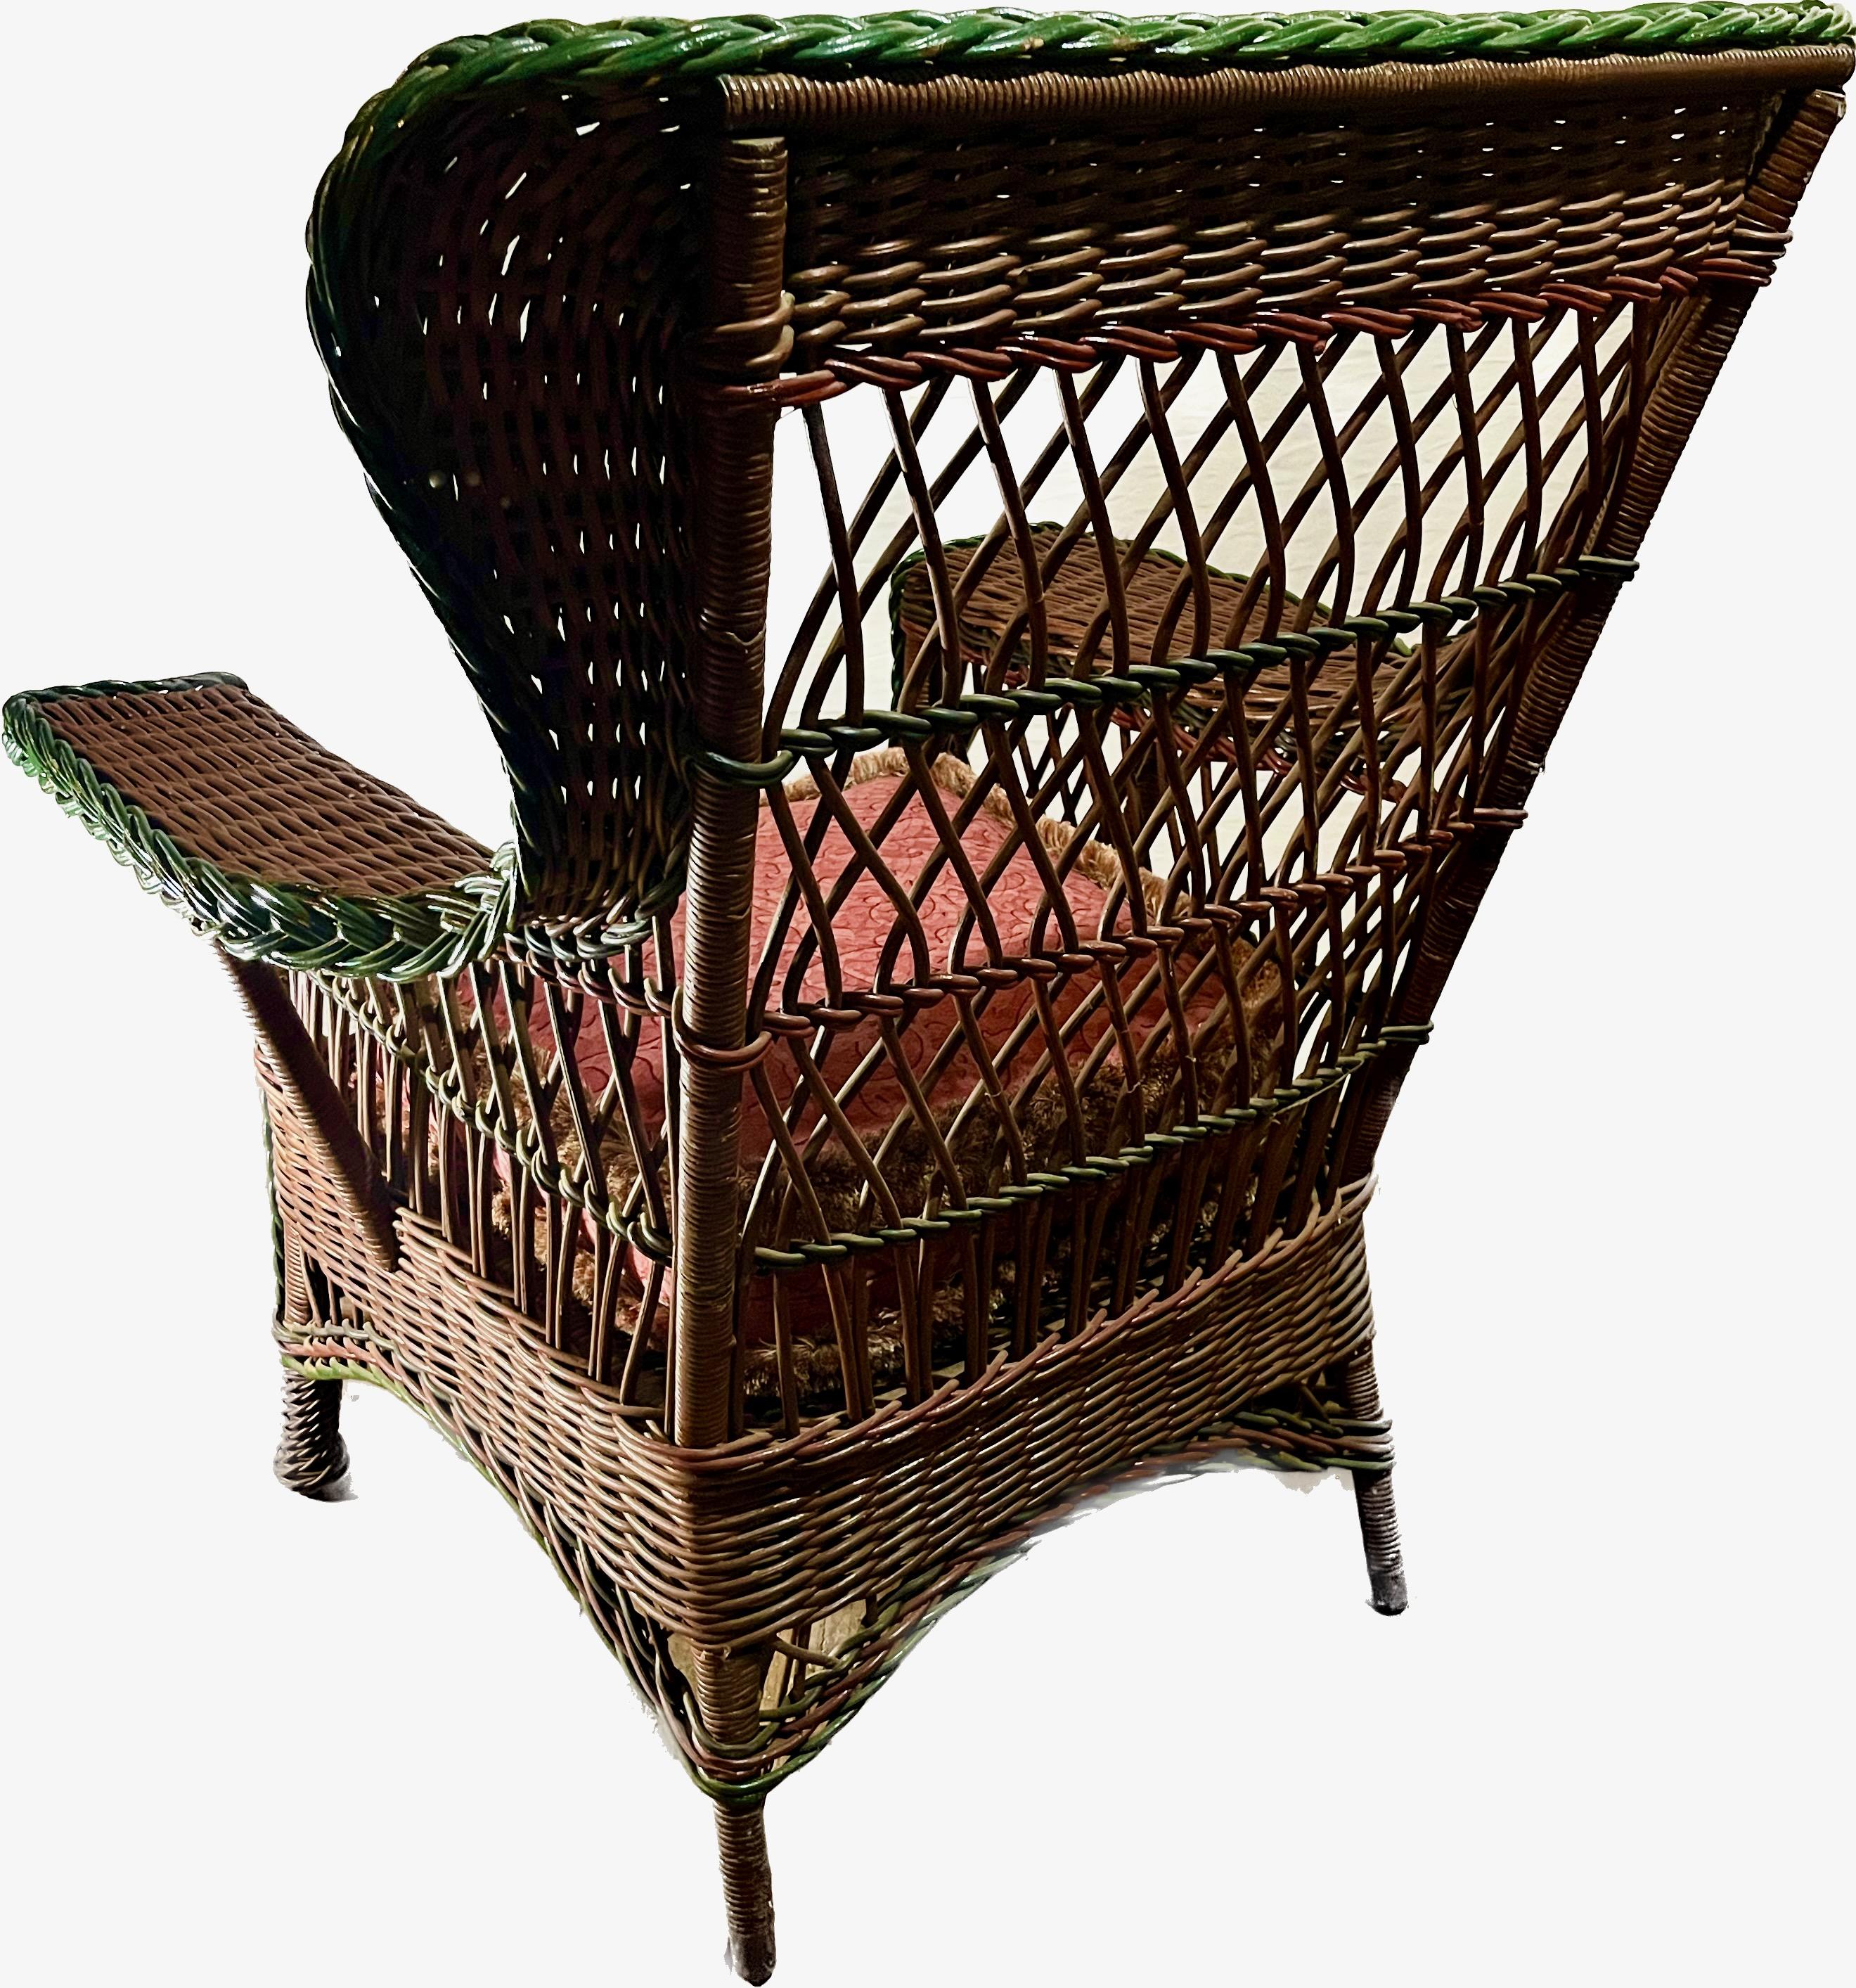 Hand-Woven Antique Bar Harbor Style Wicker Wing Chair in Natural Finish with Green Trim